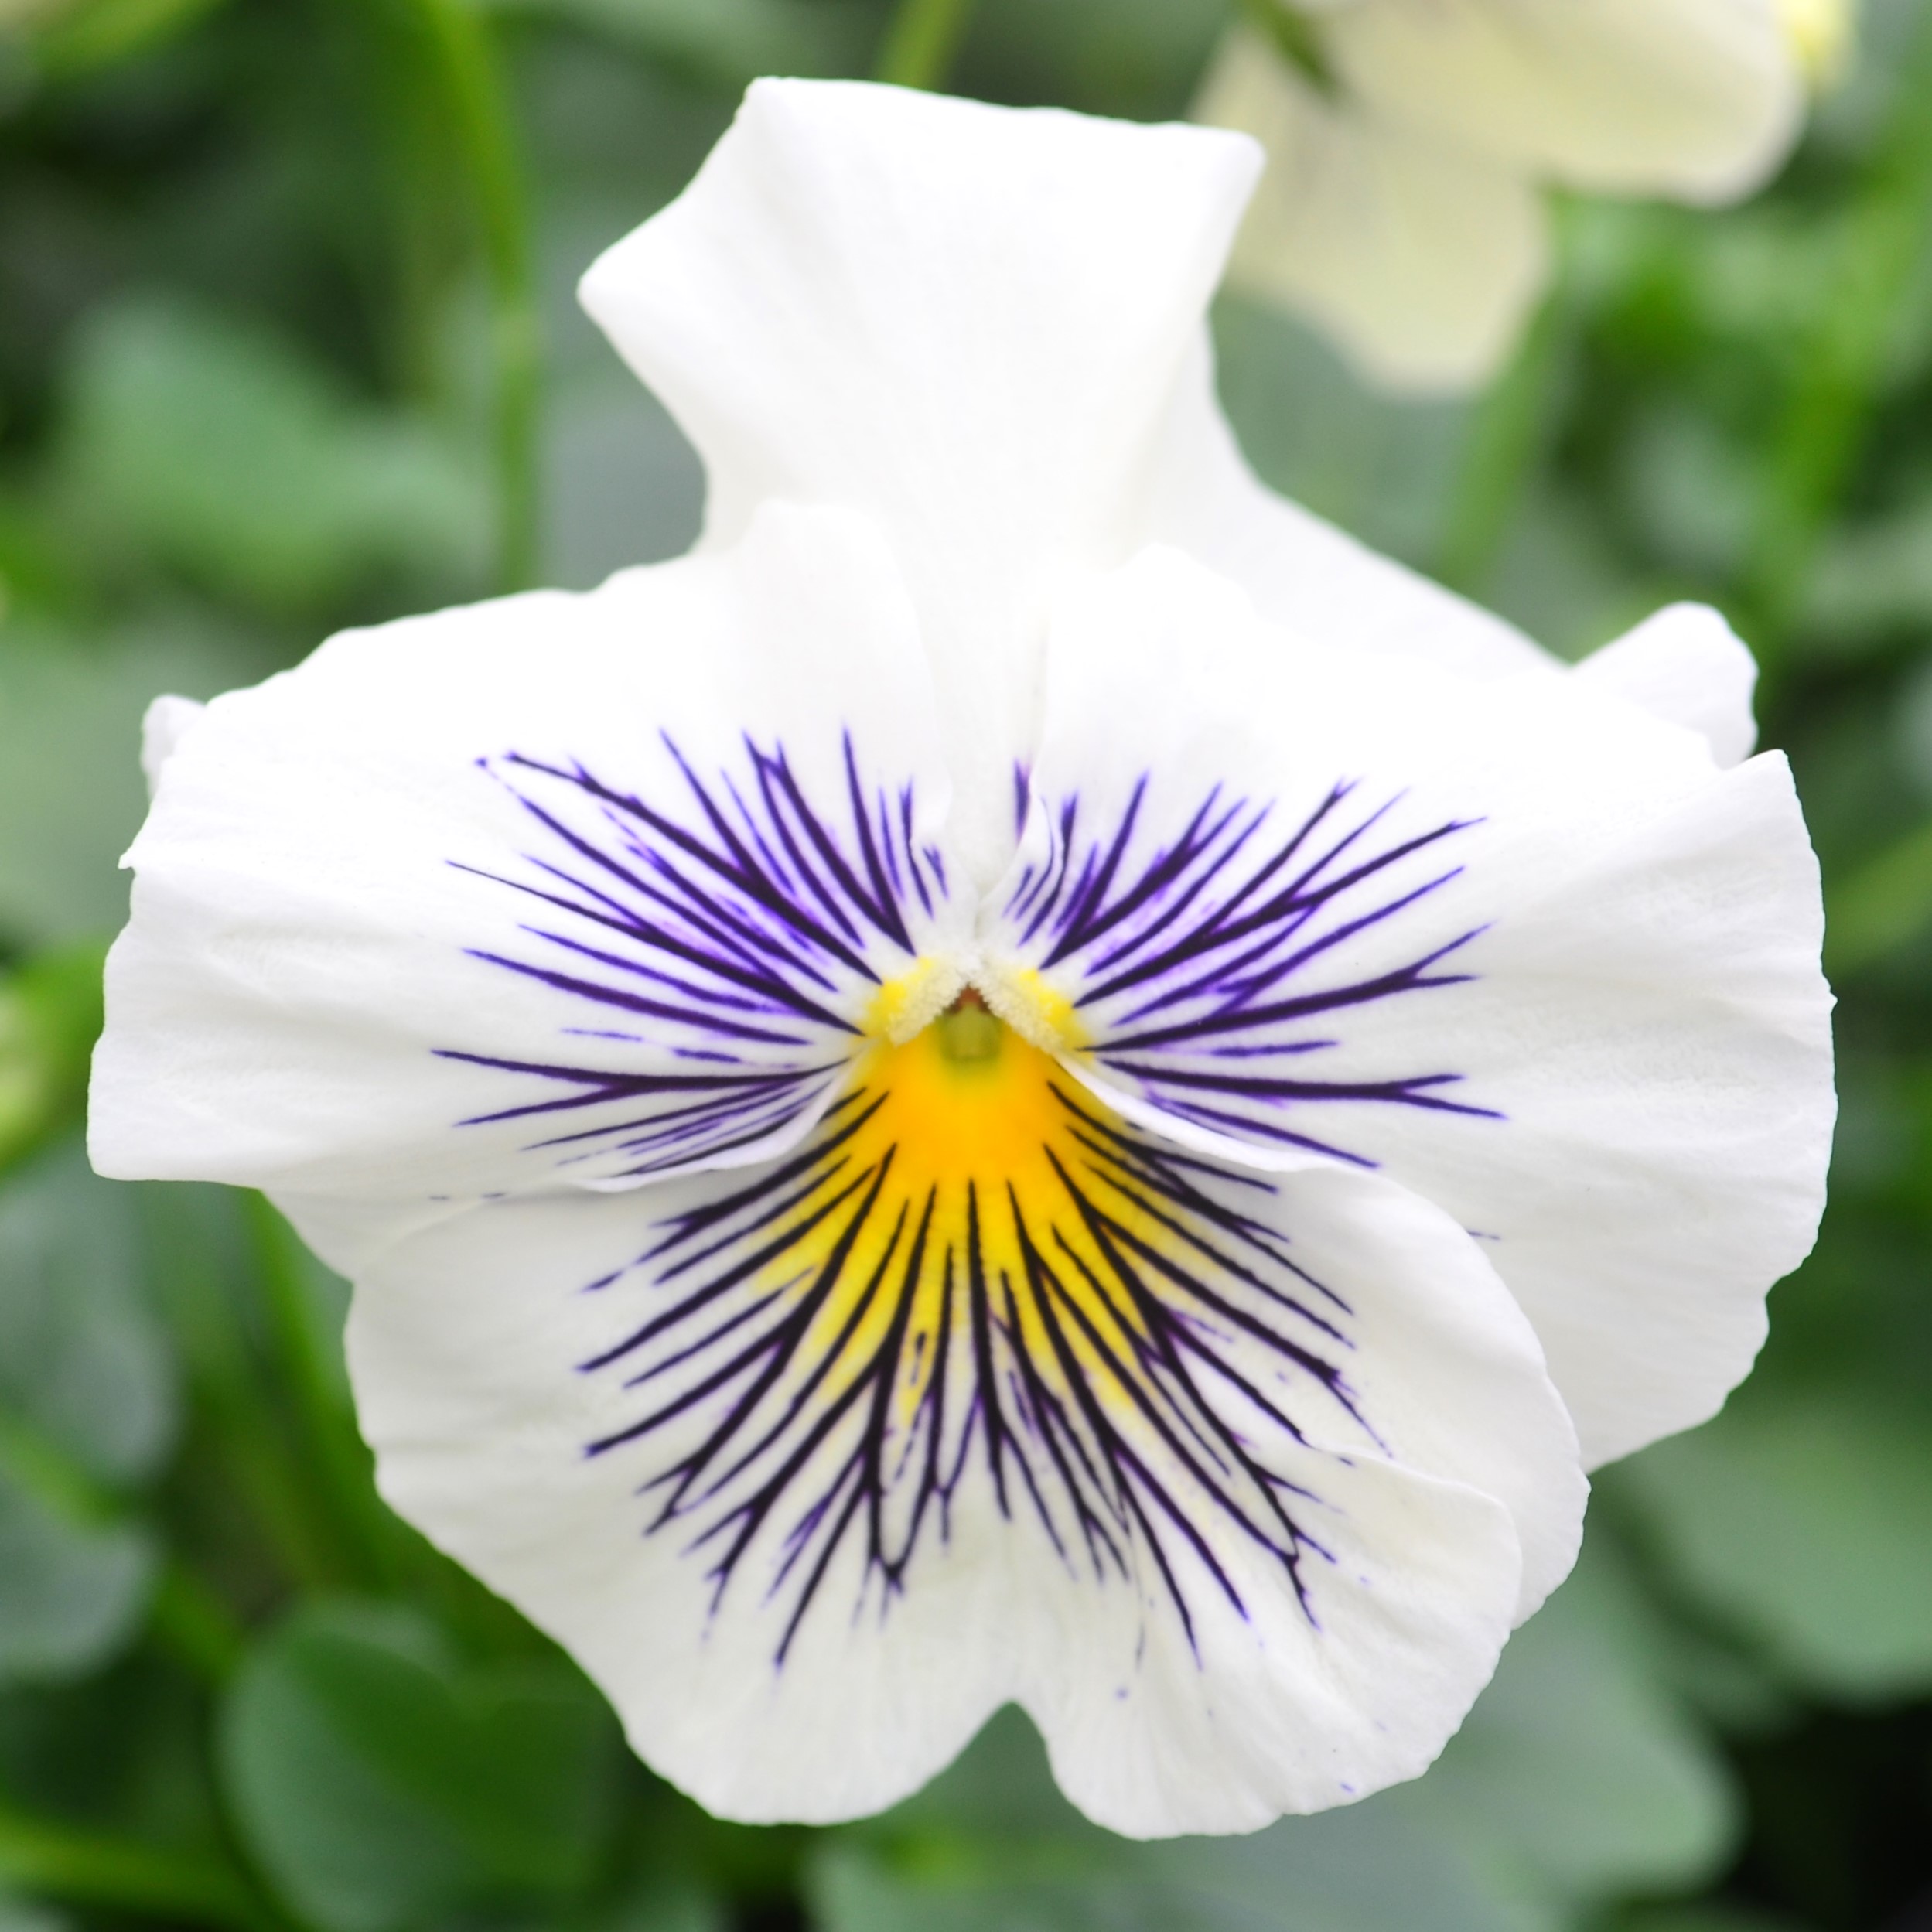 Viola wittrockiana Cats Plus 'White' - Pansy from Hillcrest Nursery